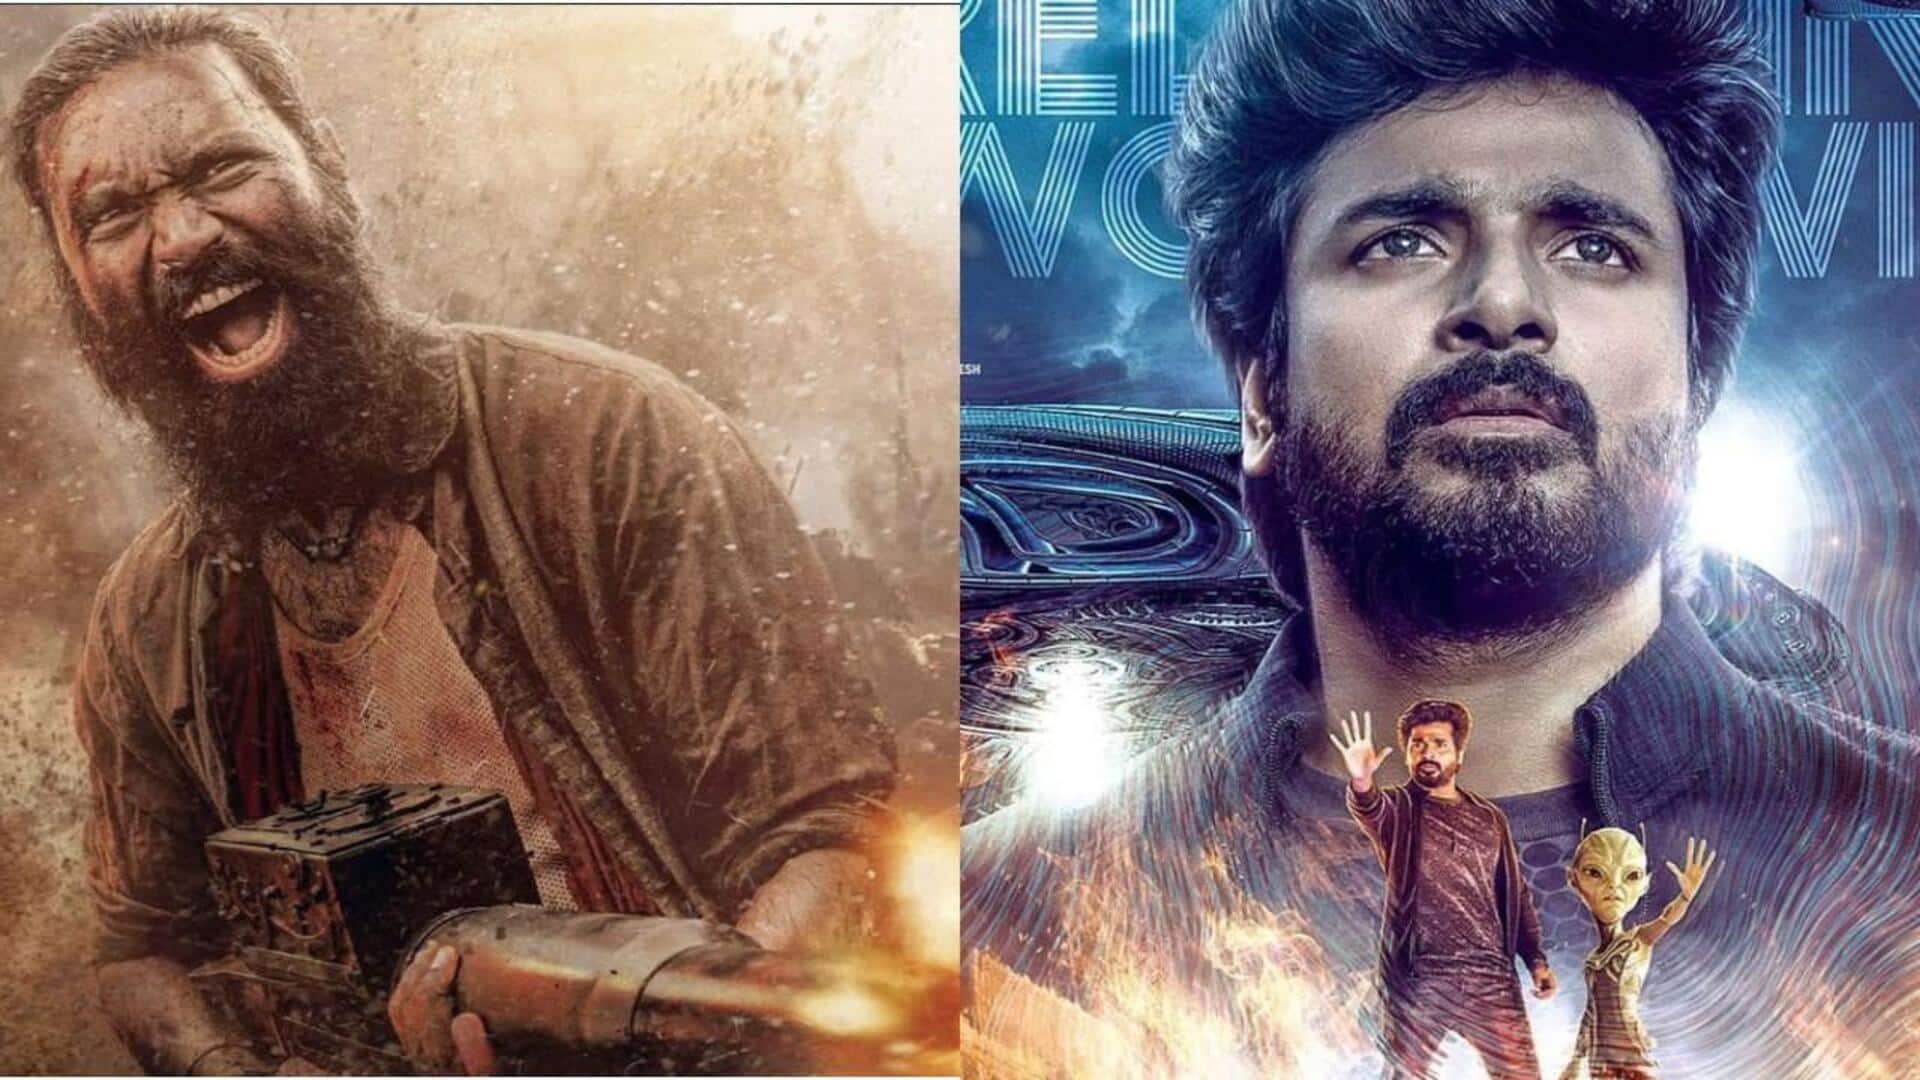 Box office collection: 'Captain Miller' and 'Ayalaan' going neck-to-neck